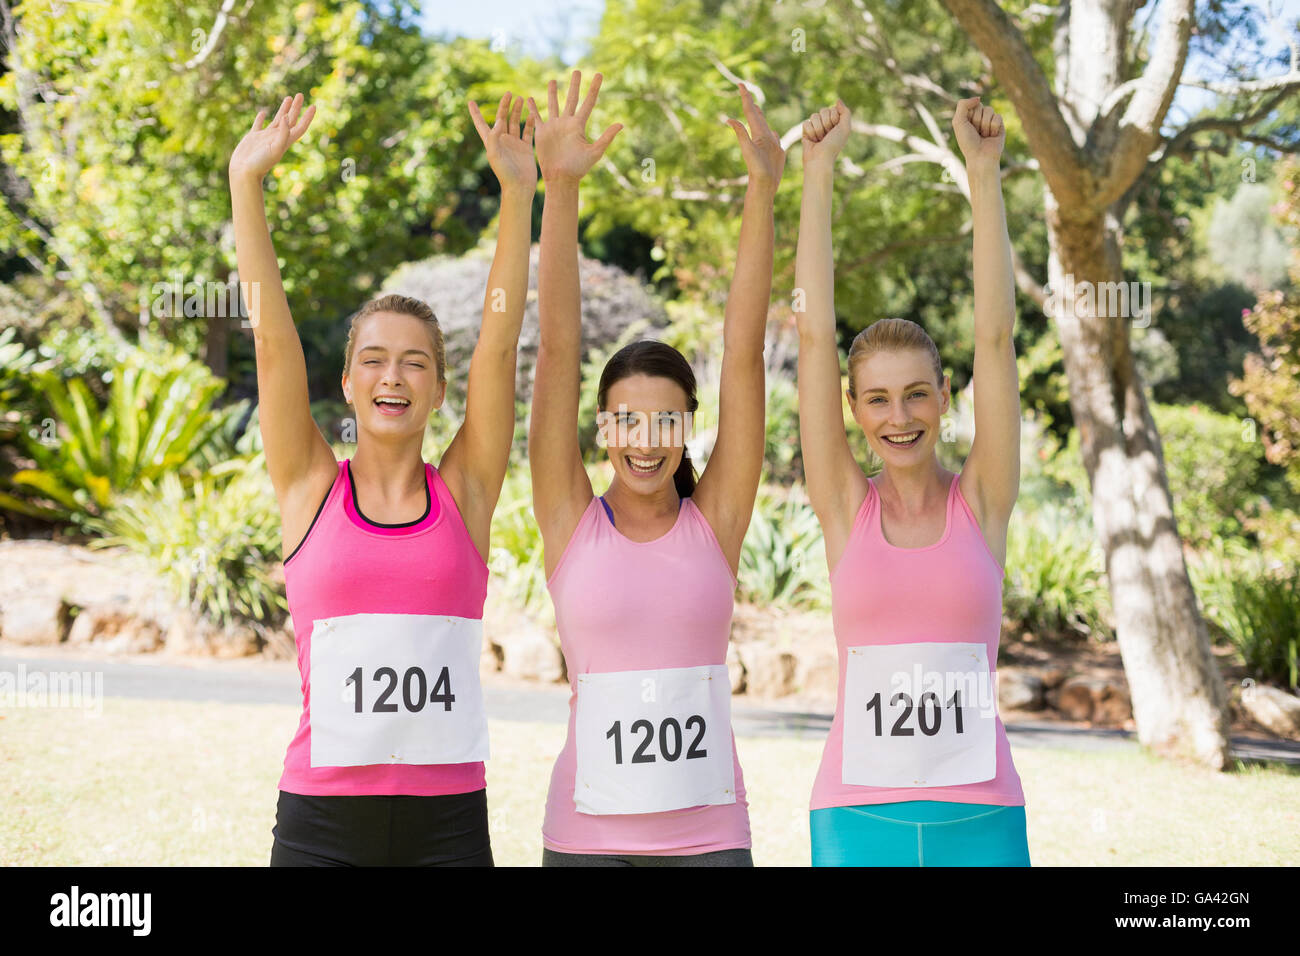 Young athlete women posing after victory Stock Photo